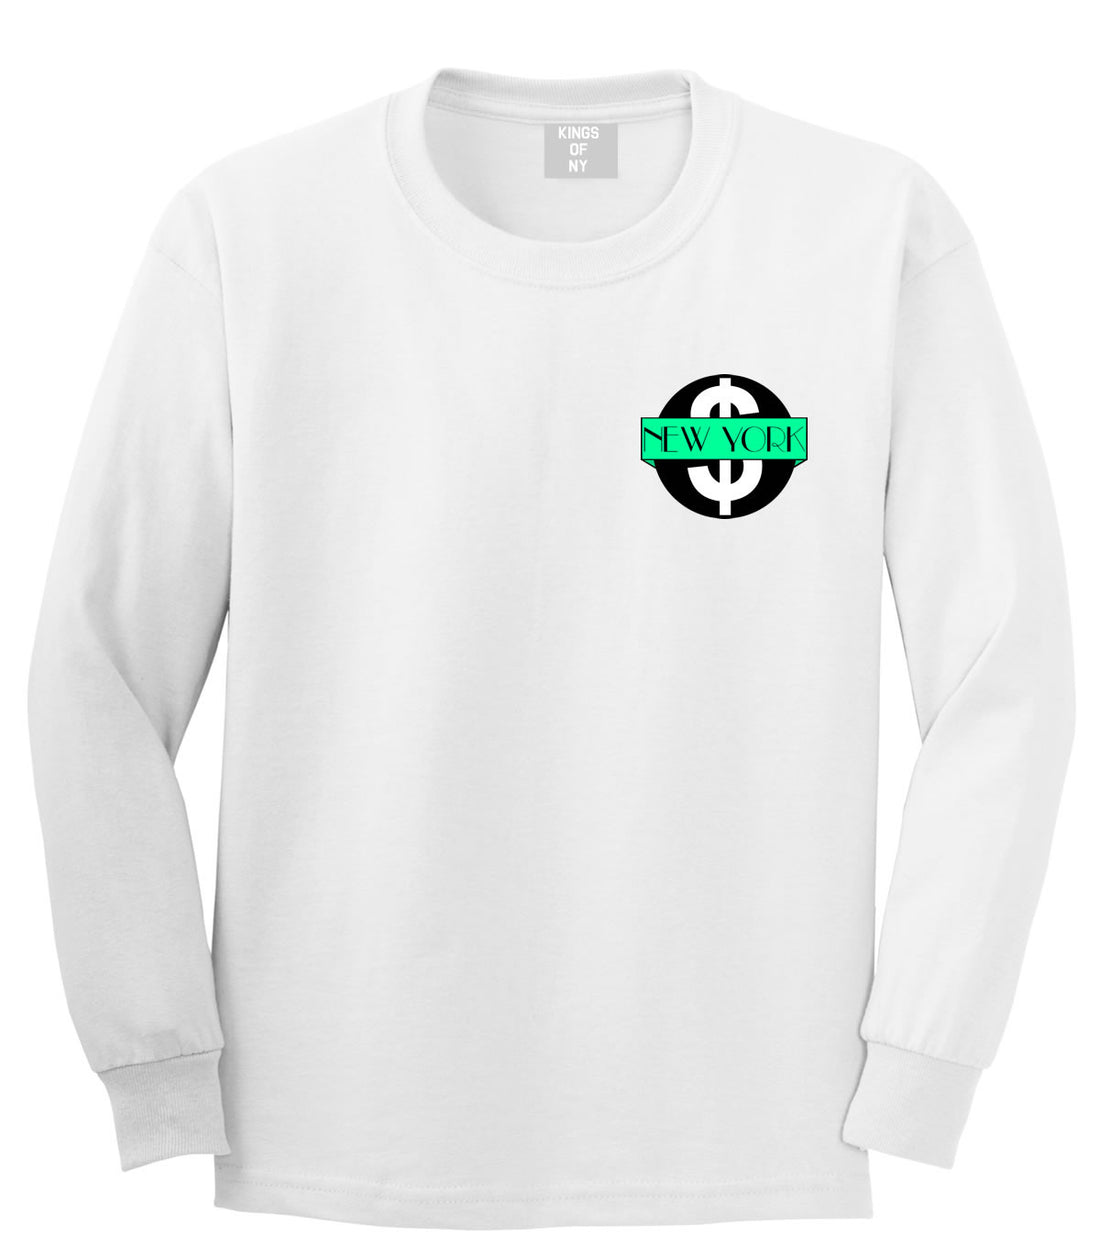 New York Mint Chest Logo Long Sleeve T-Shirt in White By Kings Of NY